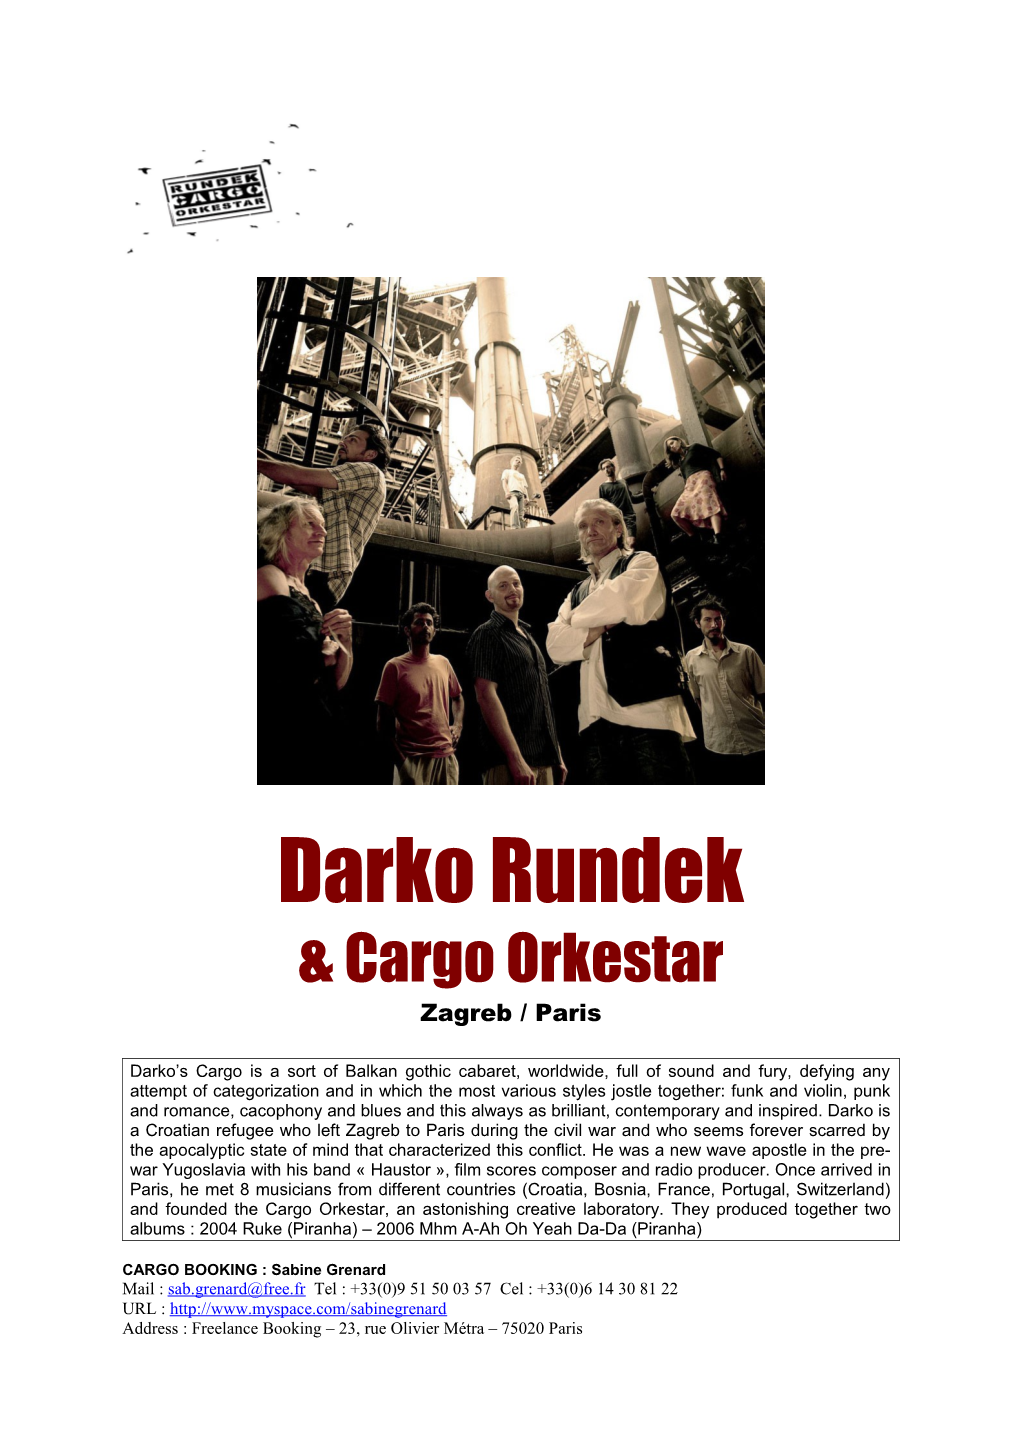 *DARKO RUNDEK* Hails from Zagreb/Croatia, and Moved to Paris in The